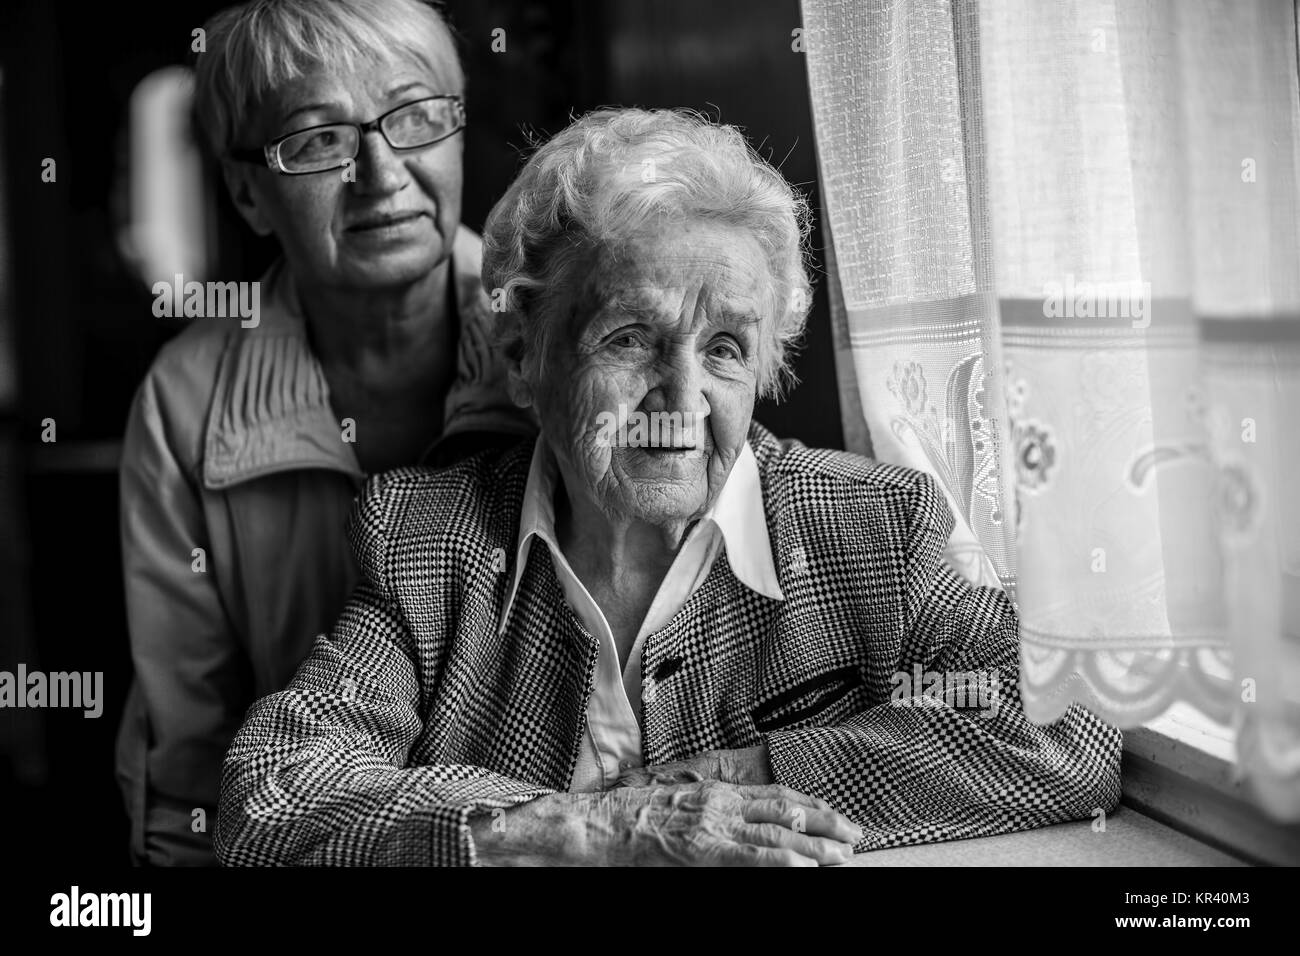 An elderly woman sitting at the table, next to a grown daughter. Black and white photo. Stock Photo